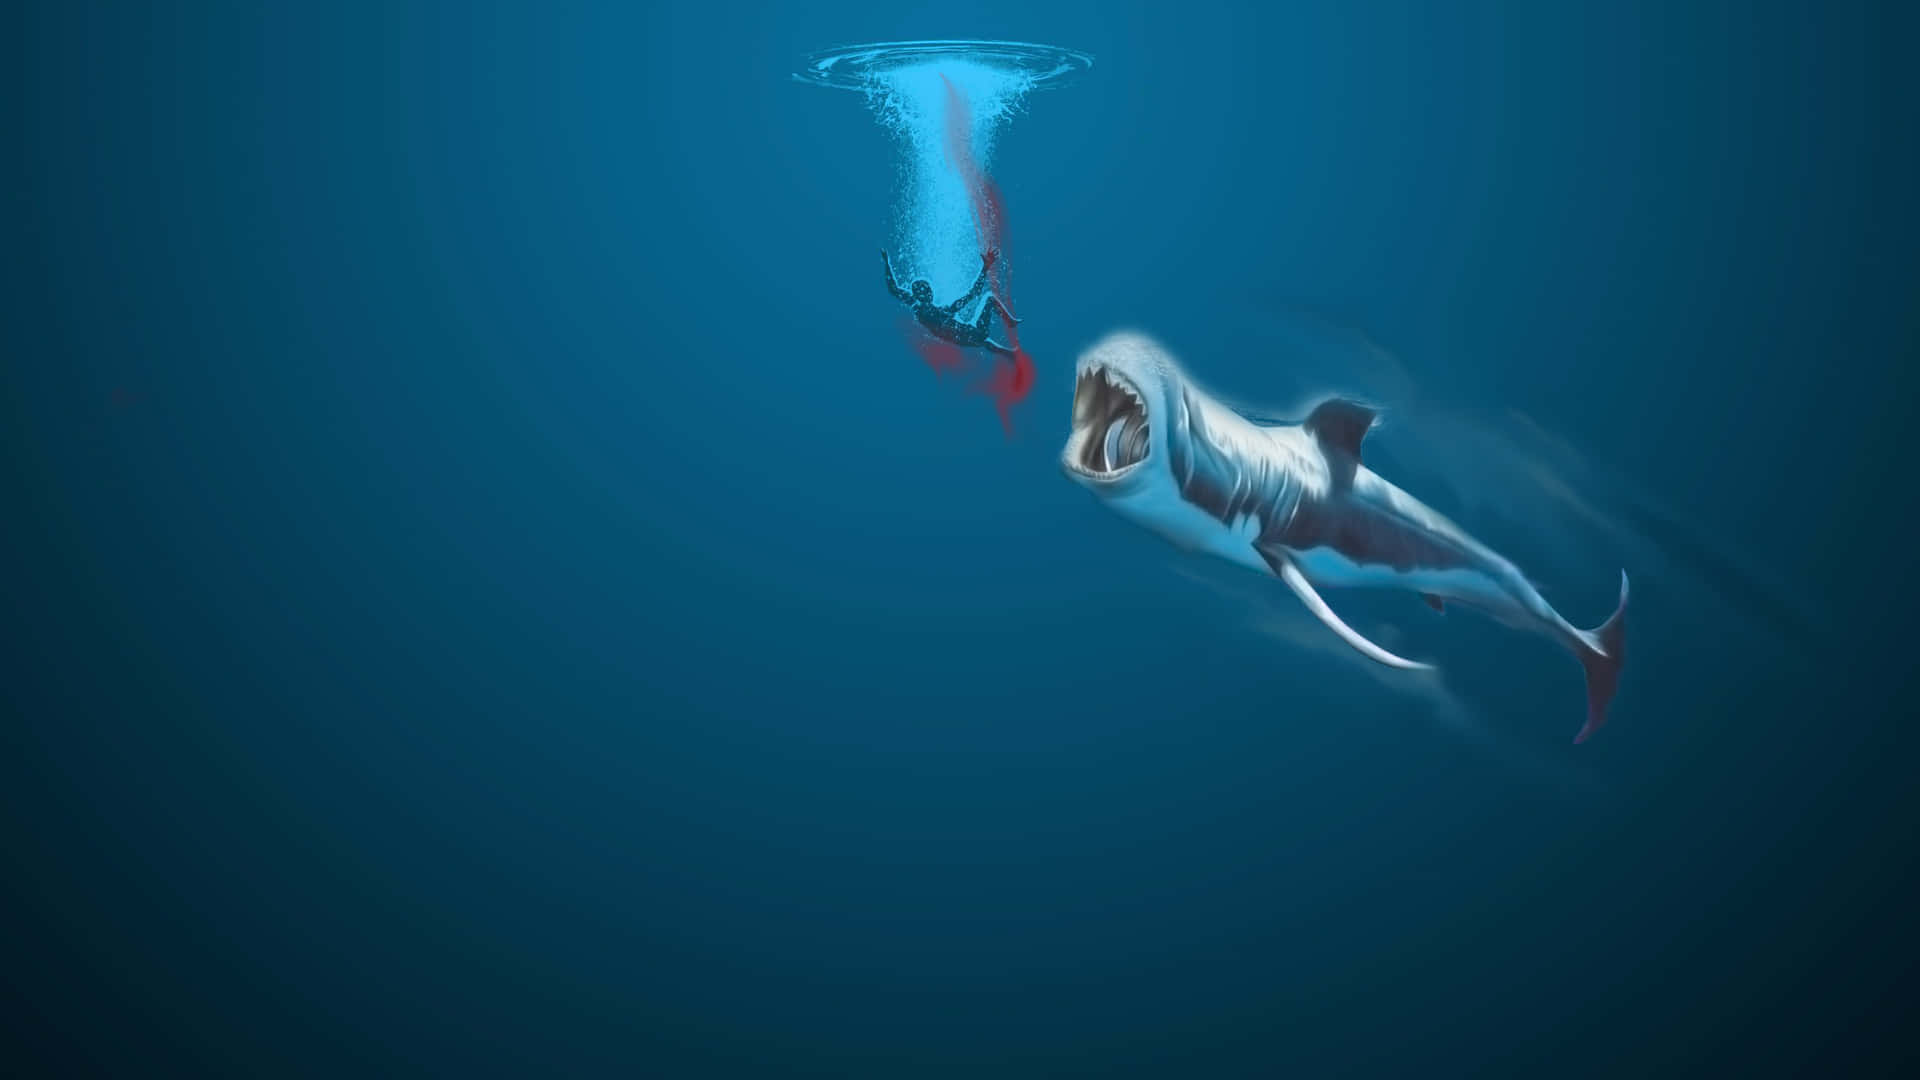 Scary Shark Hunting A Diver Wallpaper